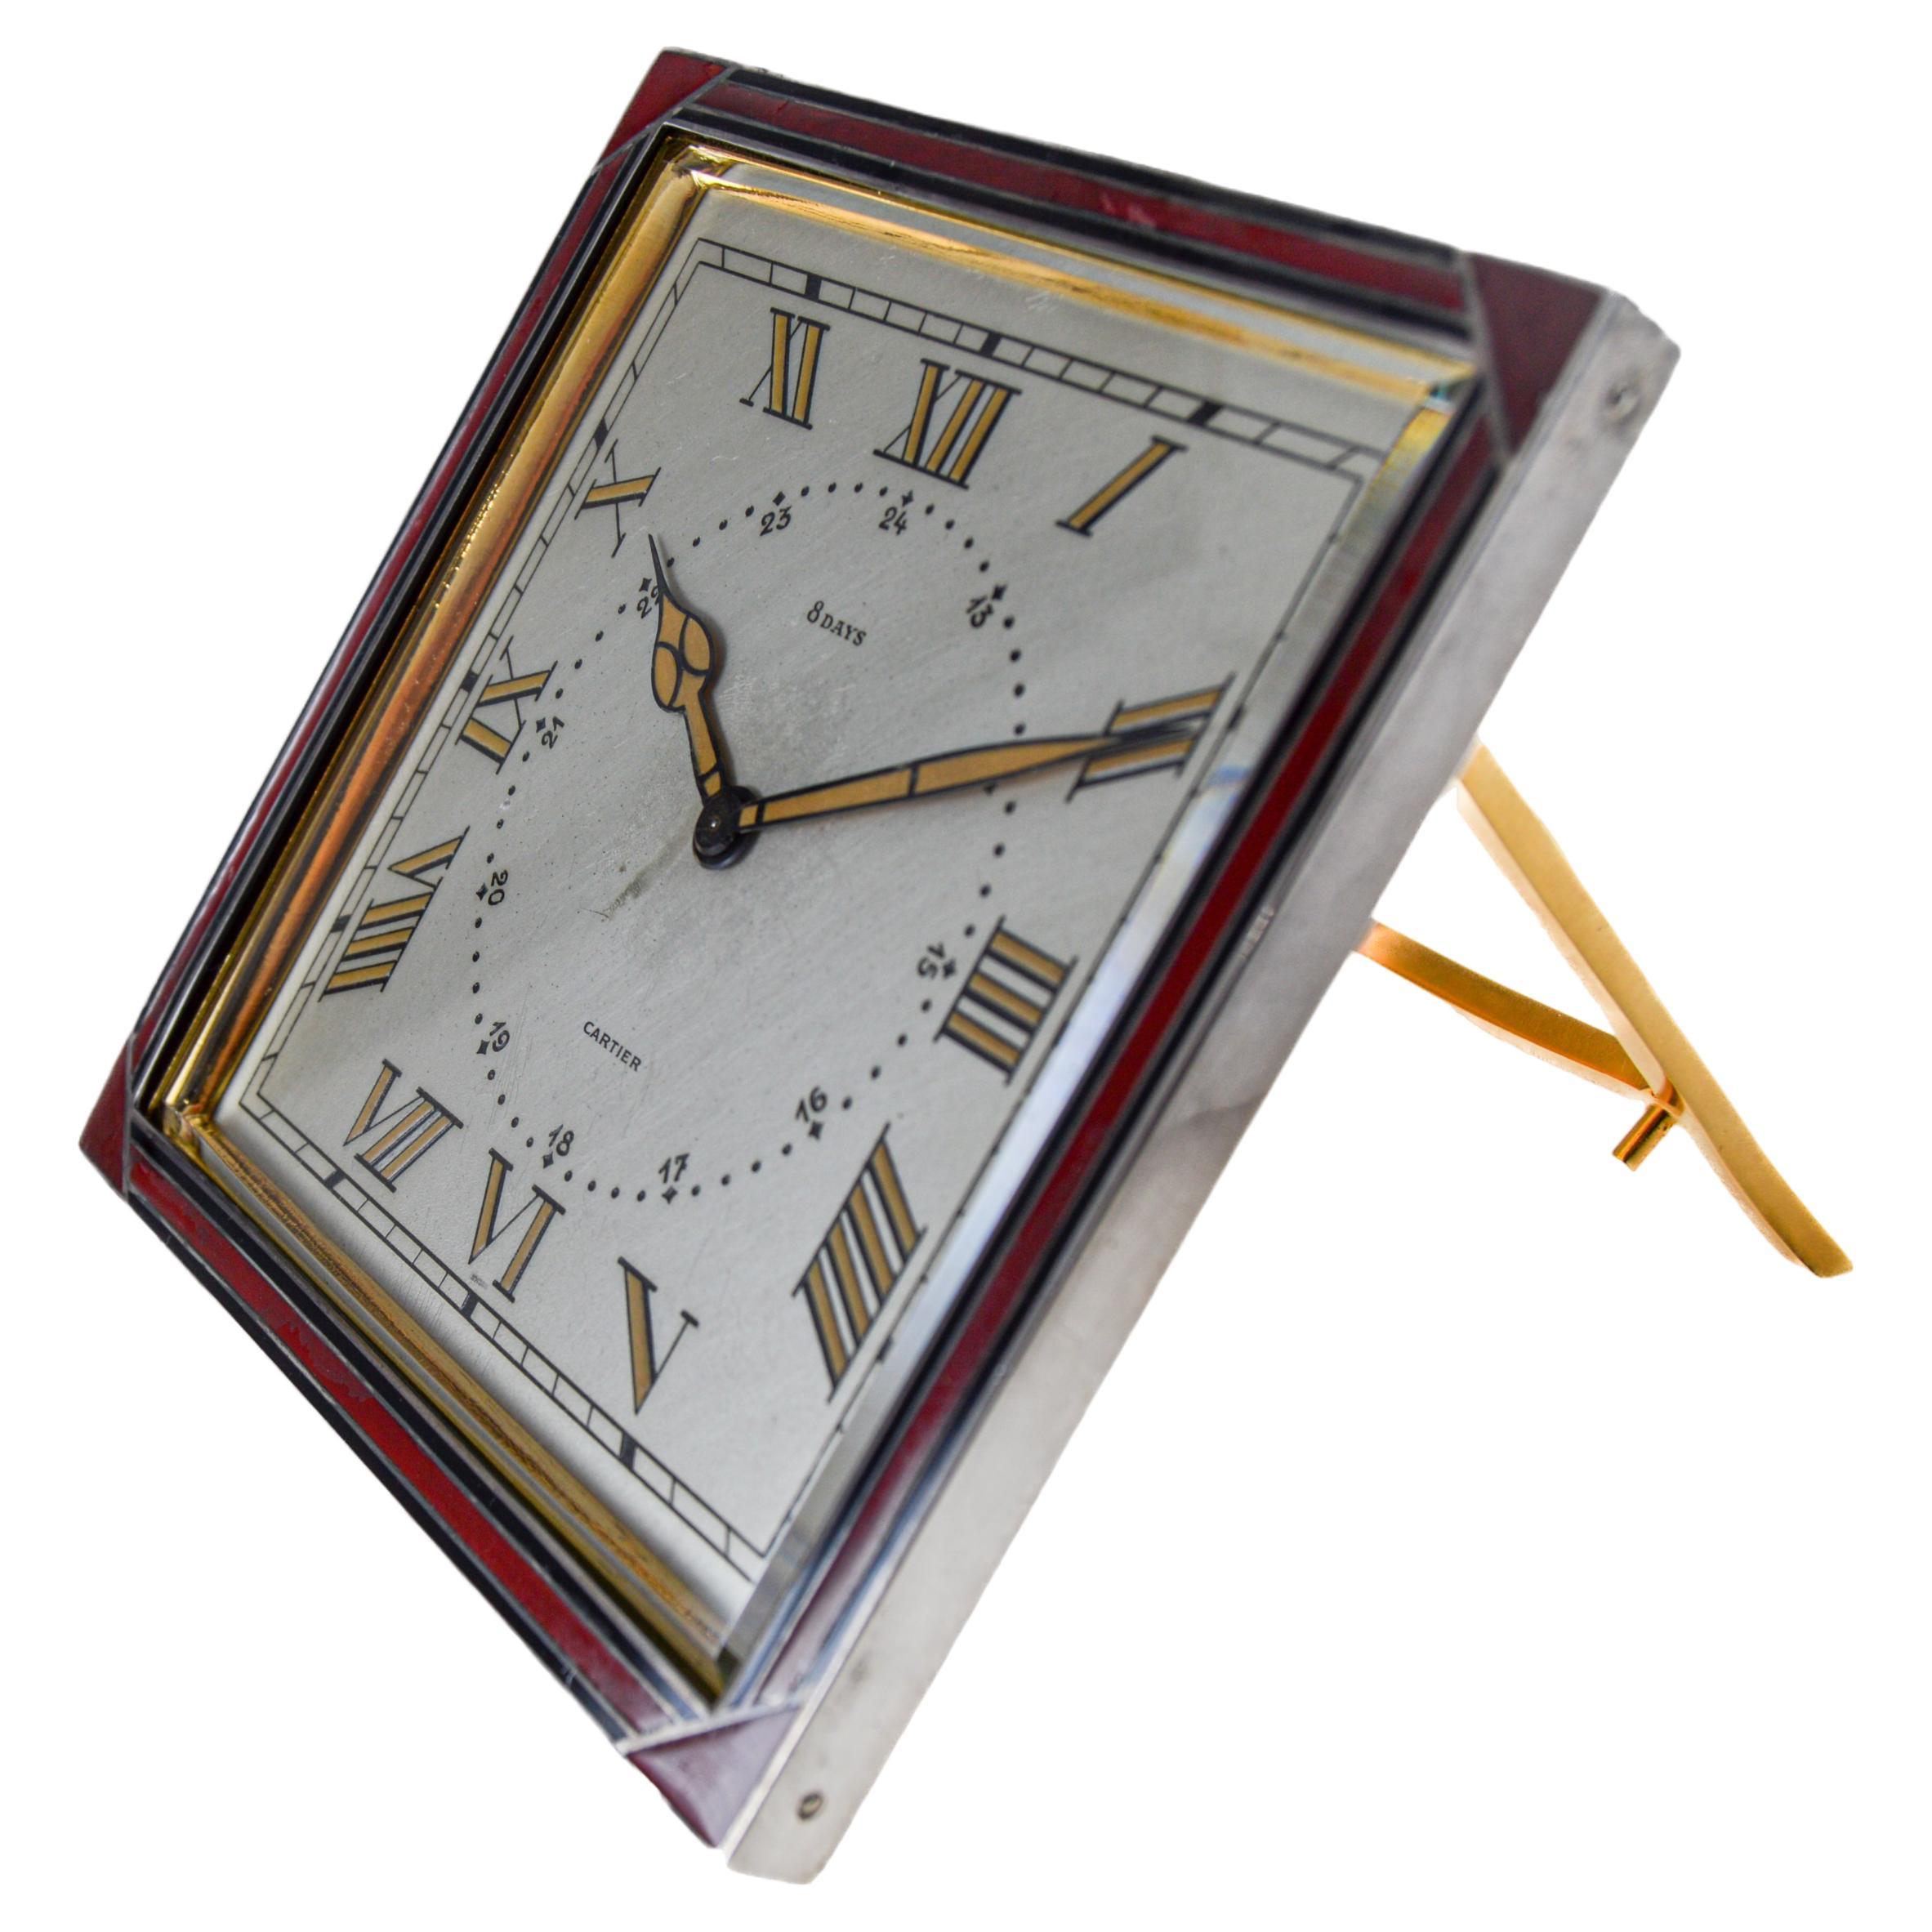 Cartier Sterling and Enamel Art Deco Desk Clock with Breguet Engine Turned Dial For Sale 4